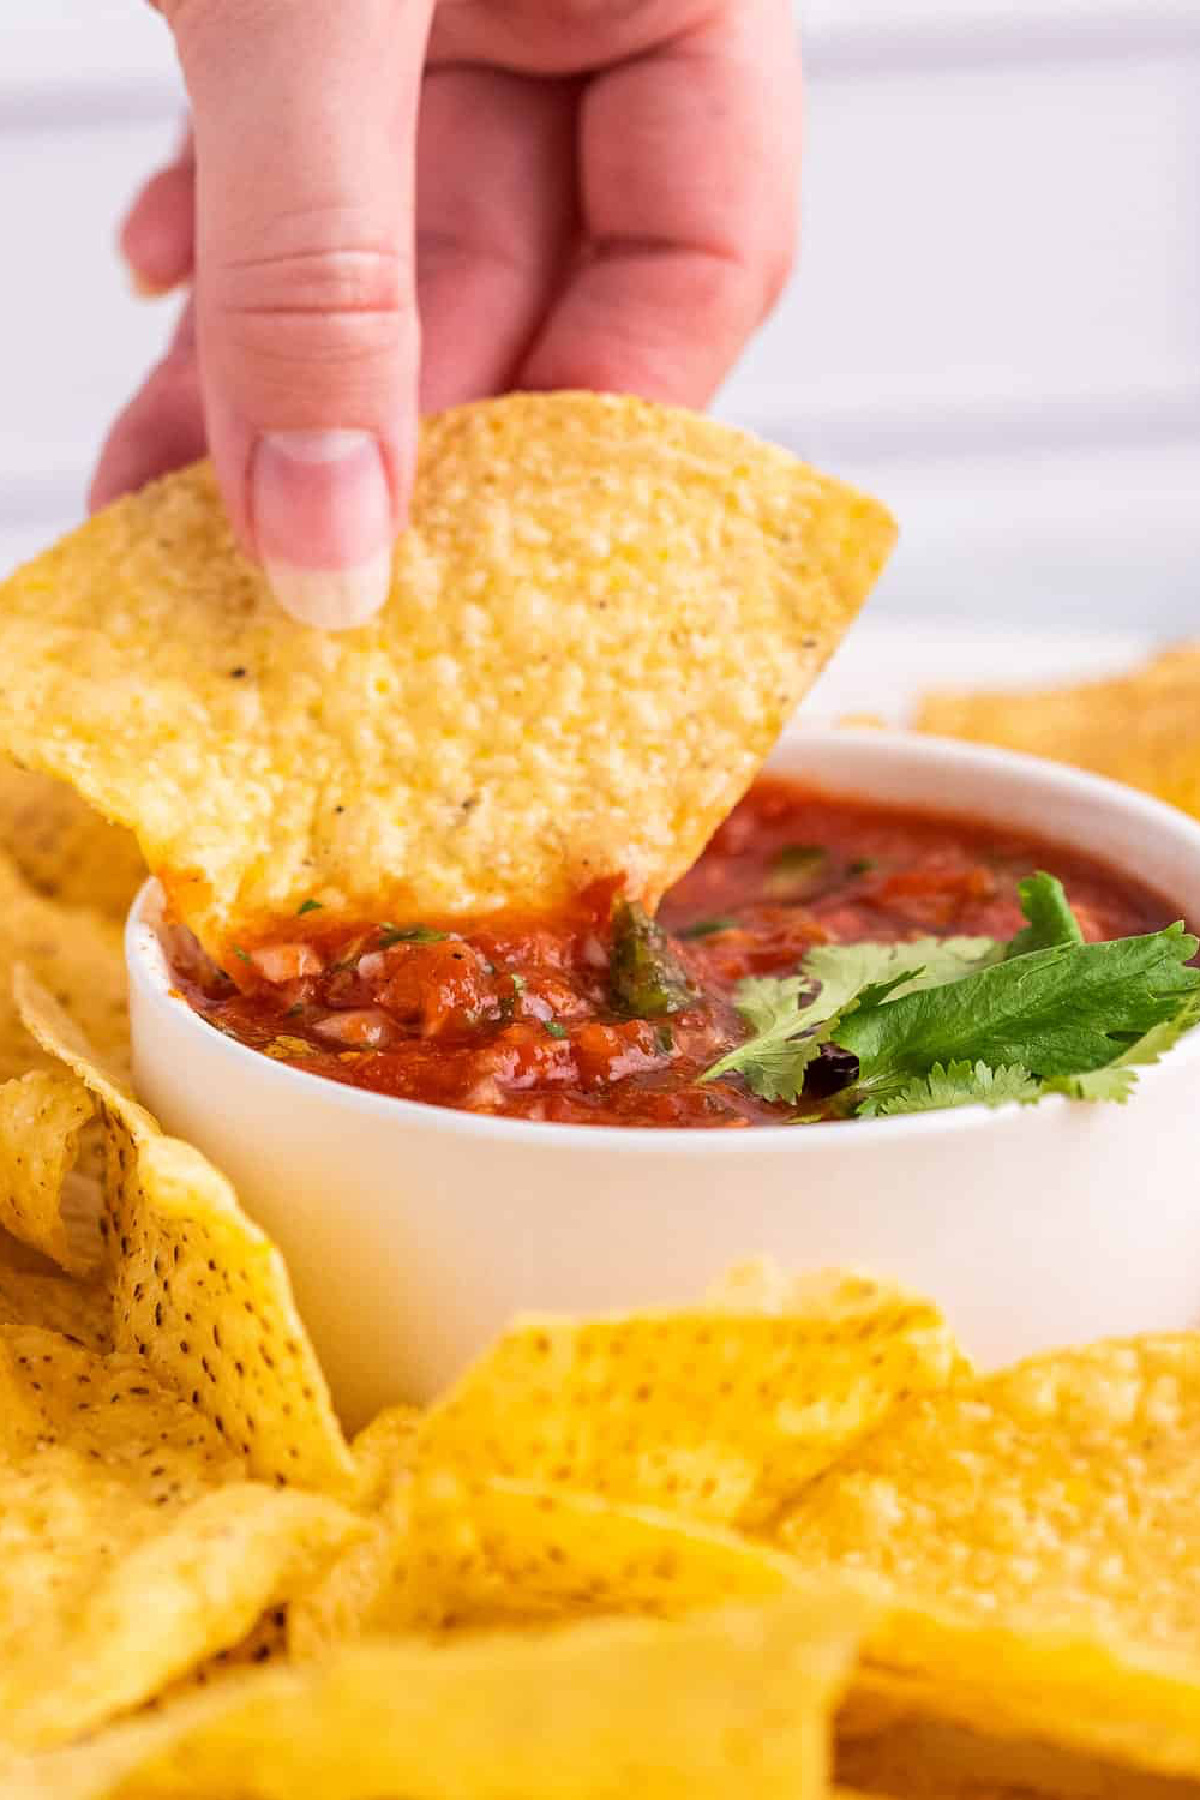 Cheap Party Food Ideas - Chips and Salsa